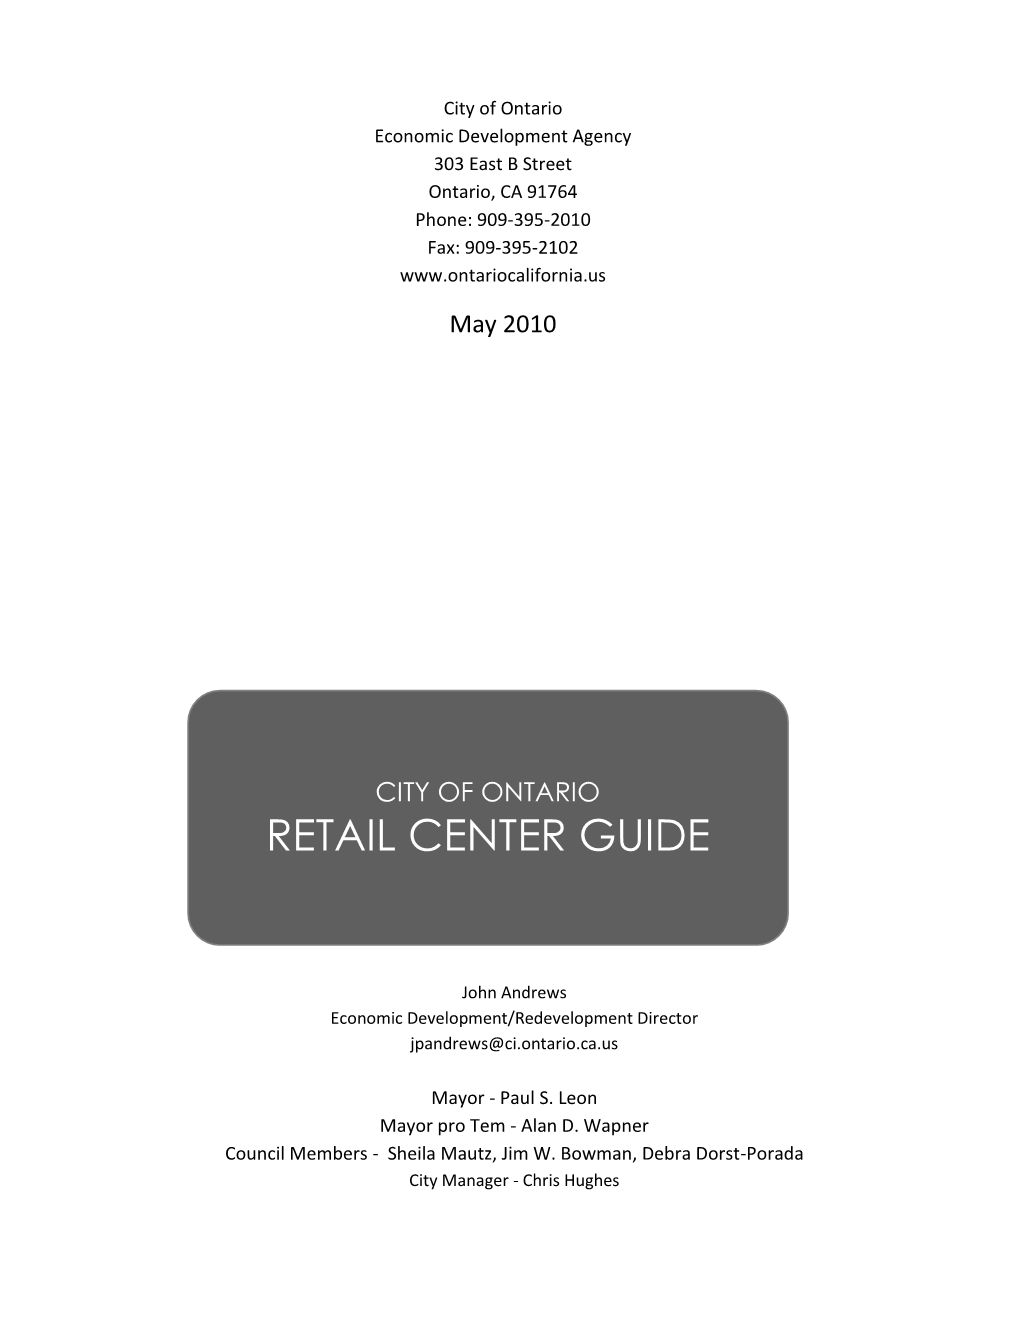 Retail Center Guide